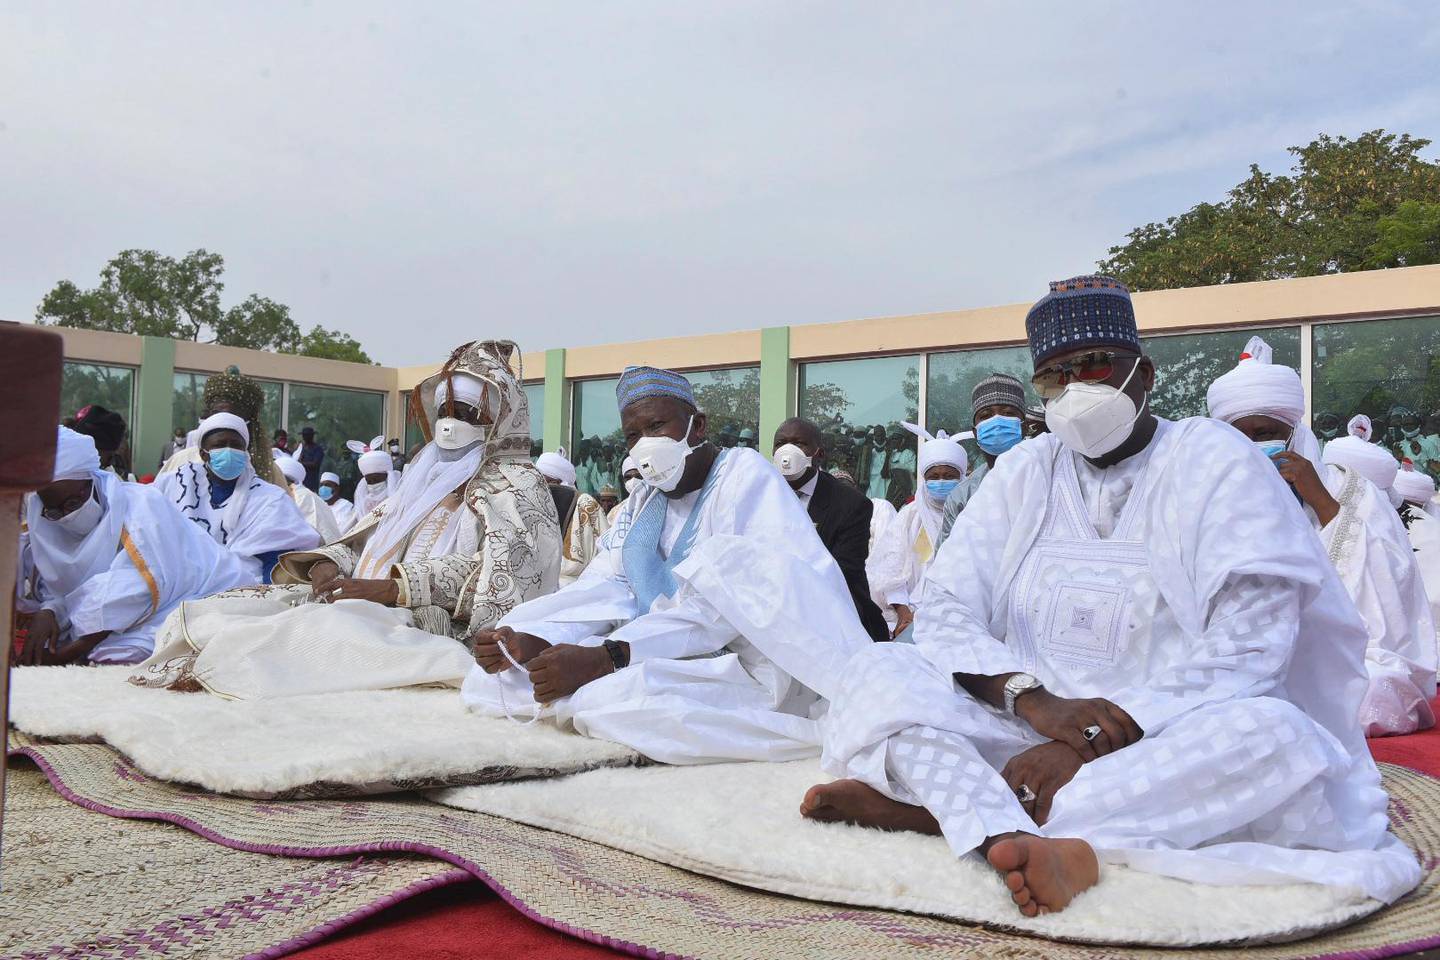 Nigeria Muslims wearing face masks to protect against coronavirus, attend Eid prayers at the Kofar Mata prayer ground in Kano Nigeria, Sunday, May 24, 2020. The holiday of Eid al-Fitr, the end of the fasting month of Ramadan, a usually joyous three-day celebration has been significantly toned down as coronavirus cases soar. (AP Photo)